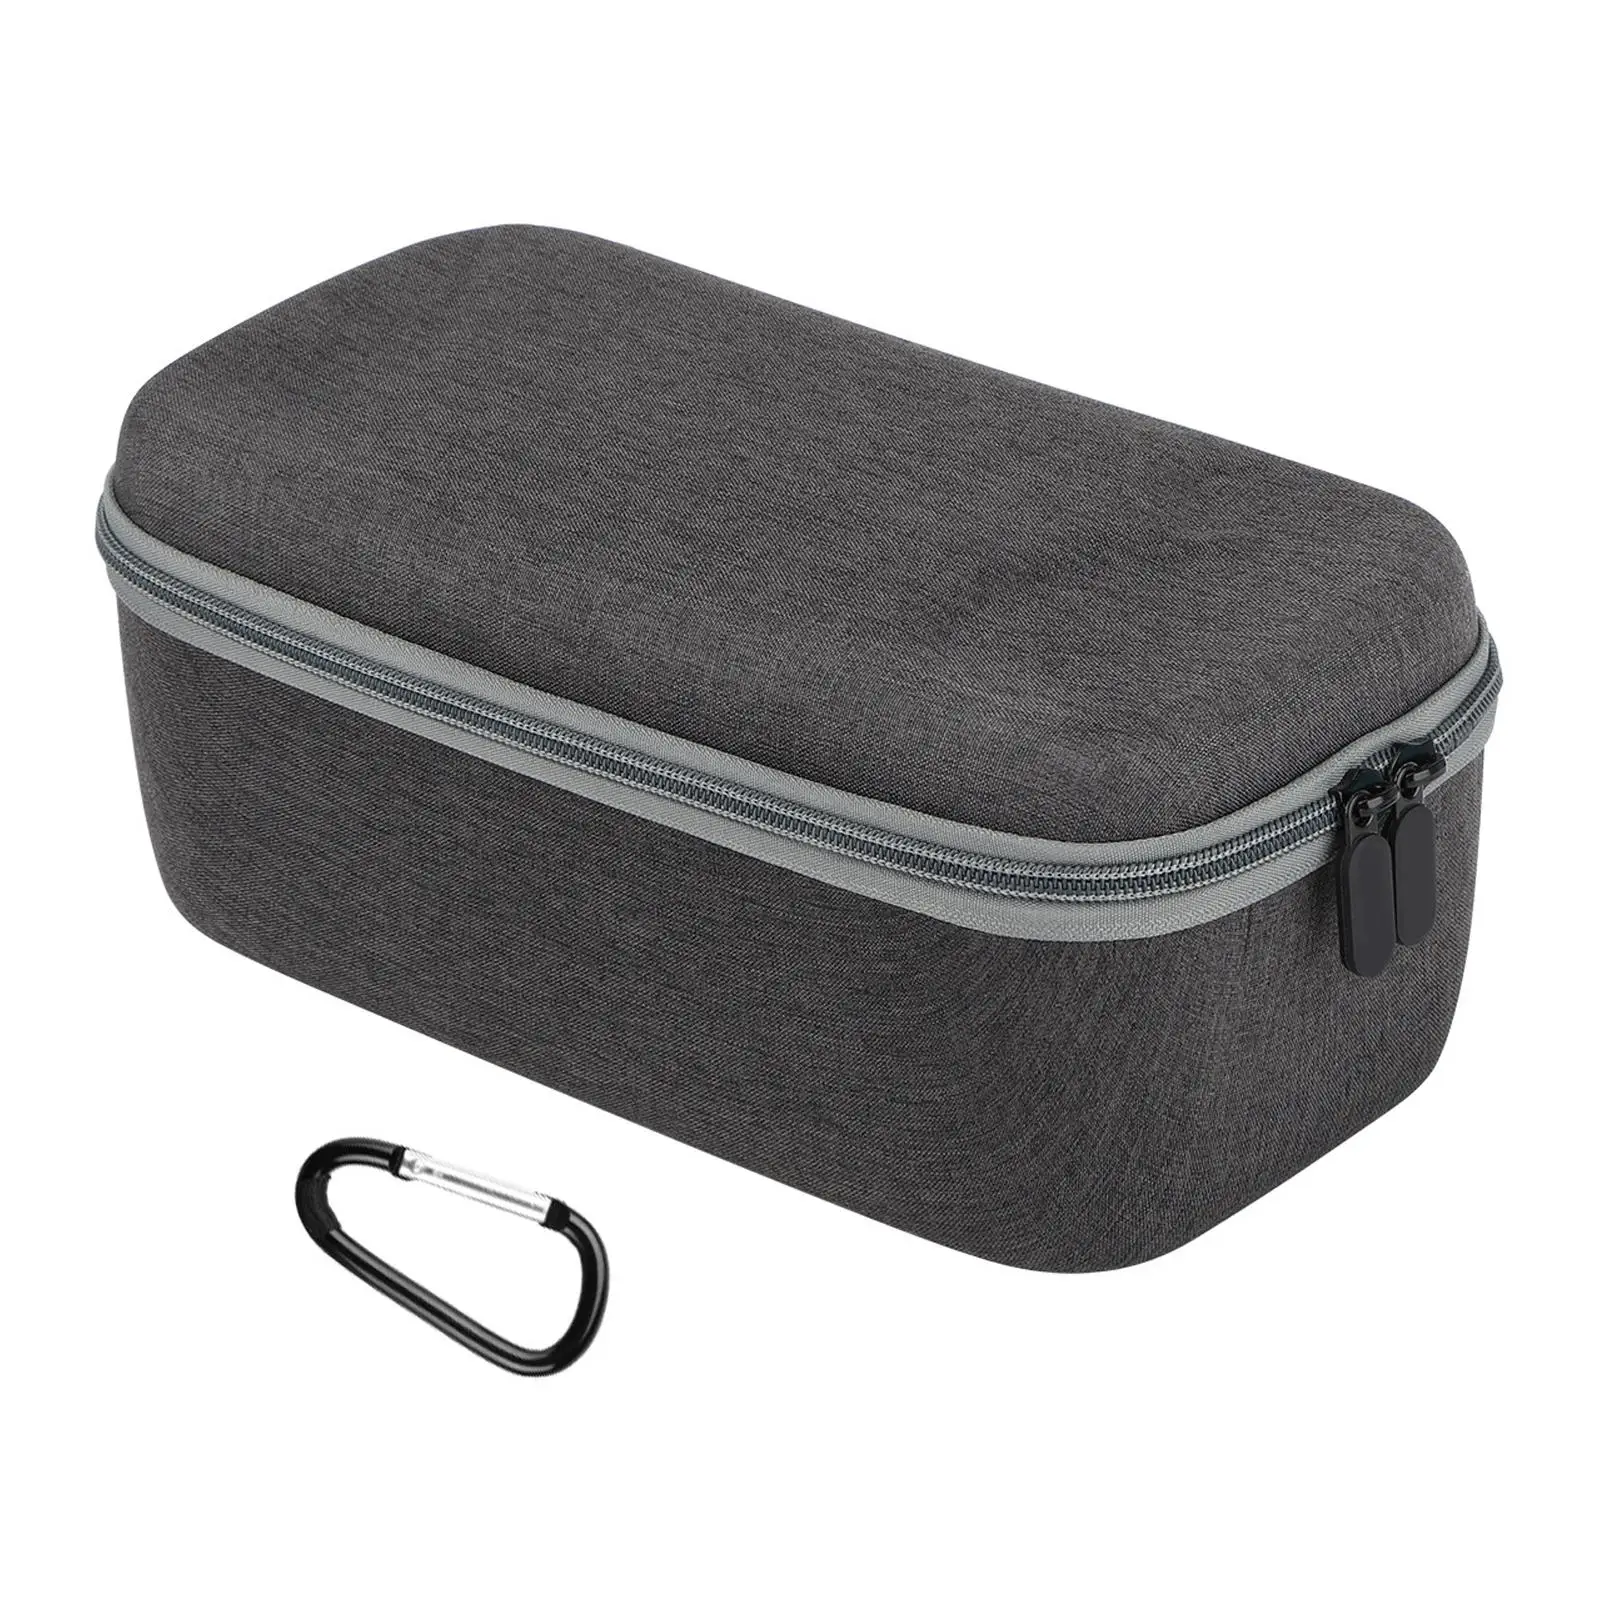 Hardshell Carrying Case Shockproof Storage Bag Outdoor Travel Storage Carrying Bag for Mavic 3 Pro Quadcopter Mavic 3 Classic